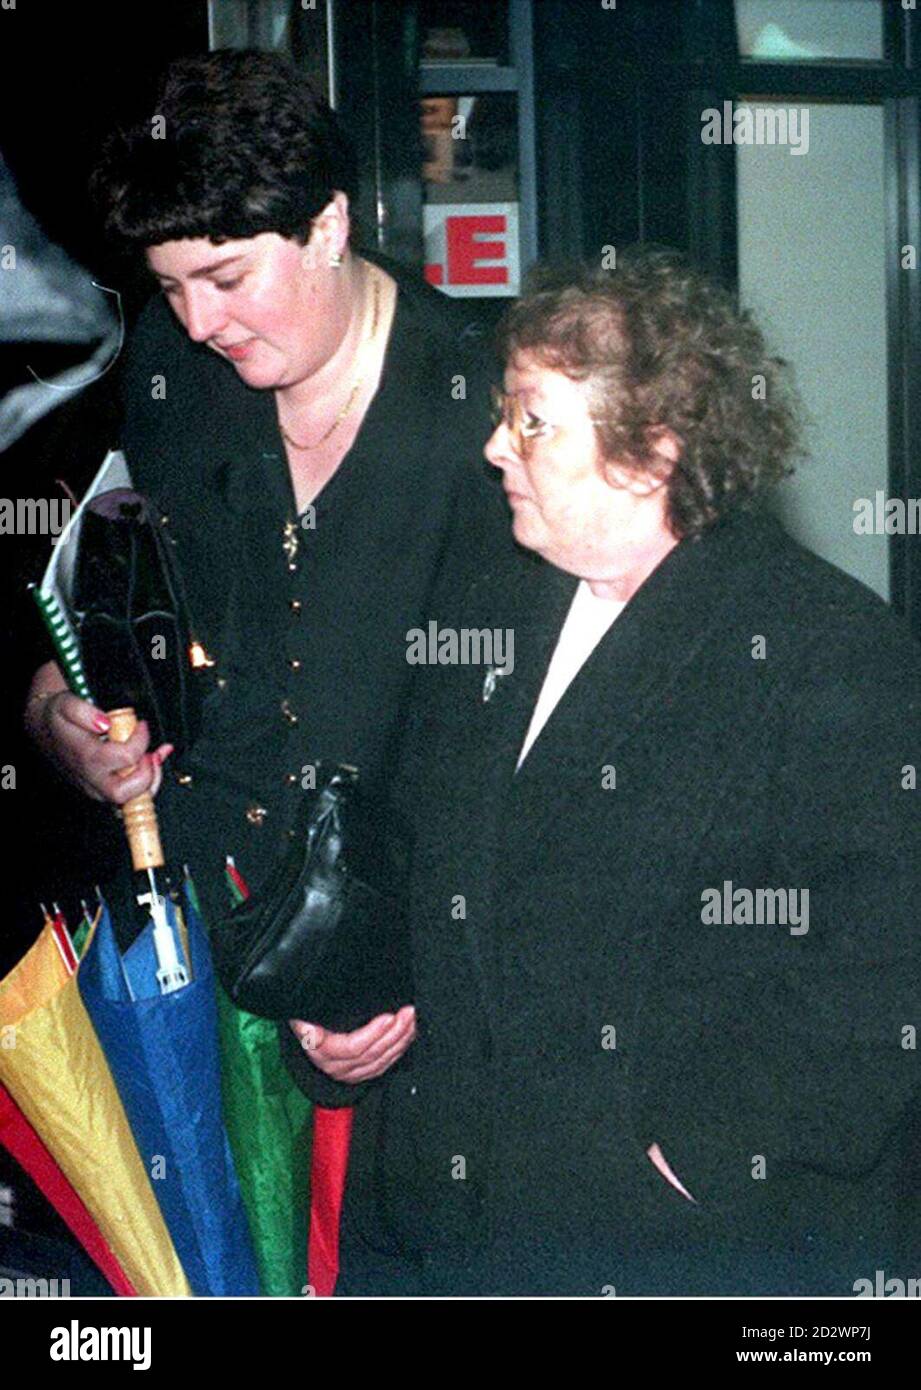 BHAM 2: BIRMINGHAM: 17.01.95: Pat Dunn leaves Birmingham County Court  today (Tuesday) with  her daughter Debbie Doyle,  where she is locked in a fierce legal battle with the mistress of her late  husband Ken Dunn,  over the right to be buried with him.  Mr Dunn died of a heart attack in 1991 in the arms  of his mistress Jean Cooper, for 16 years before his death both women shared his companionship, fully  aware of each others existence. WATCH FOR PA STORY. PA NEWS, David Jones. Stock Photo